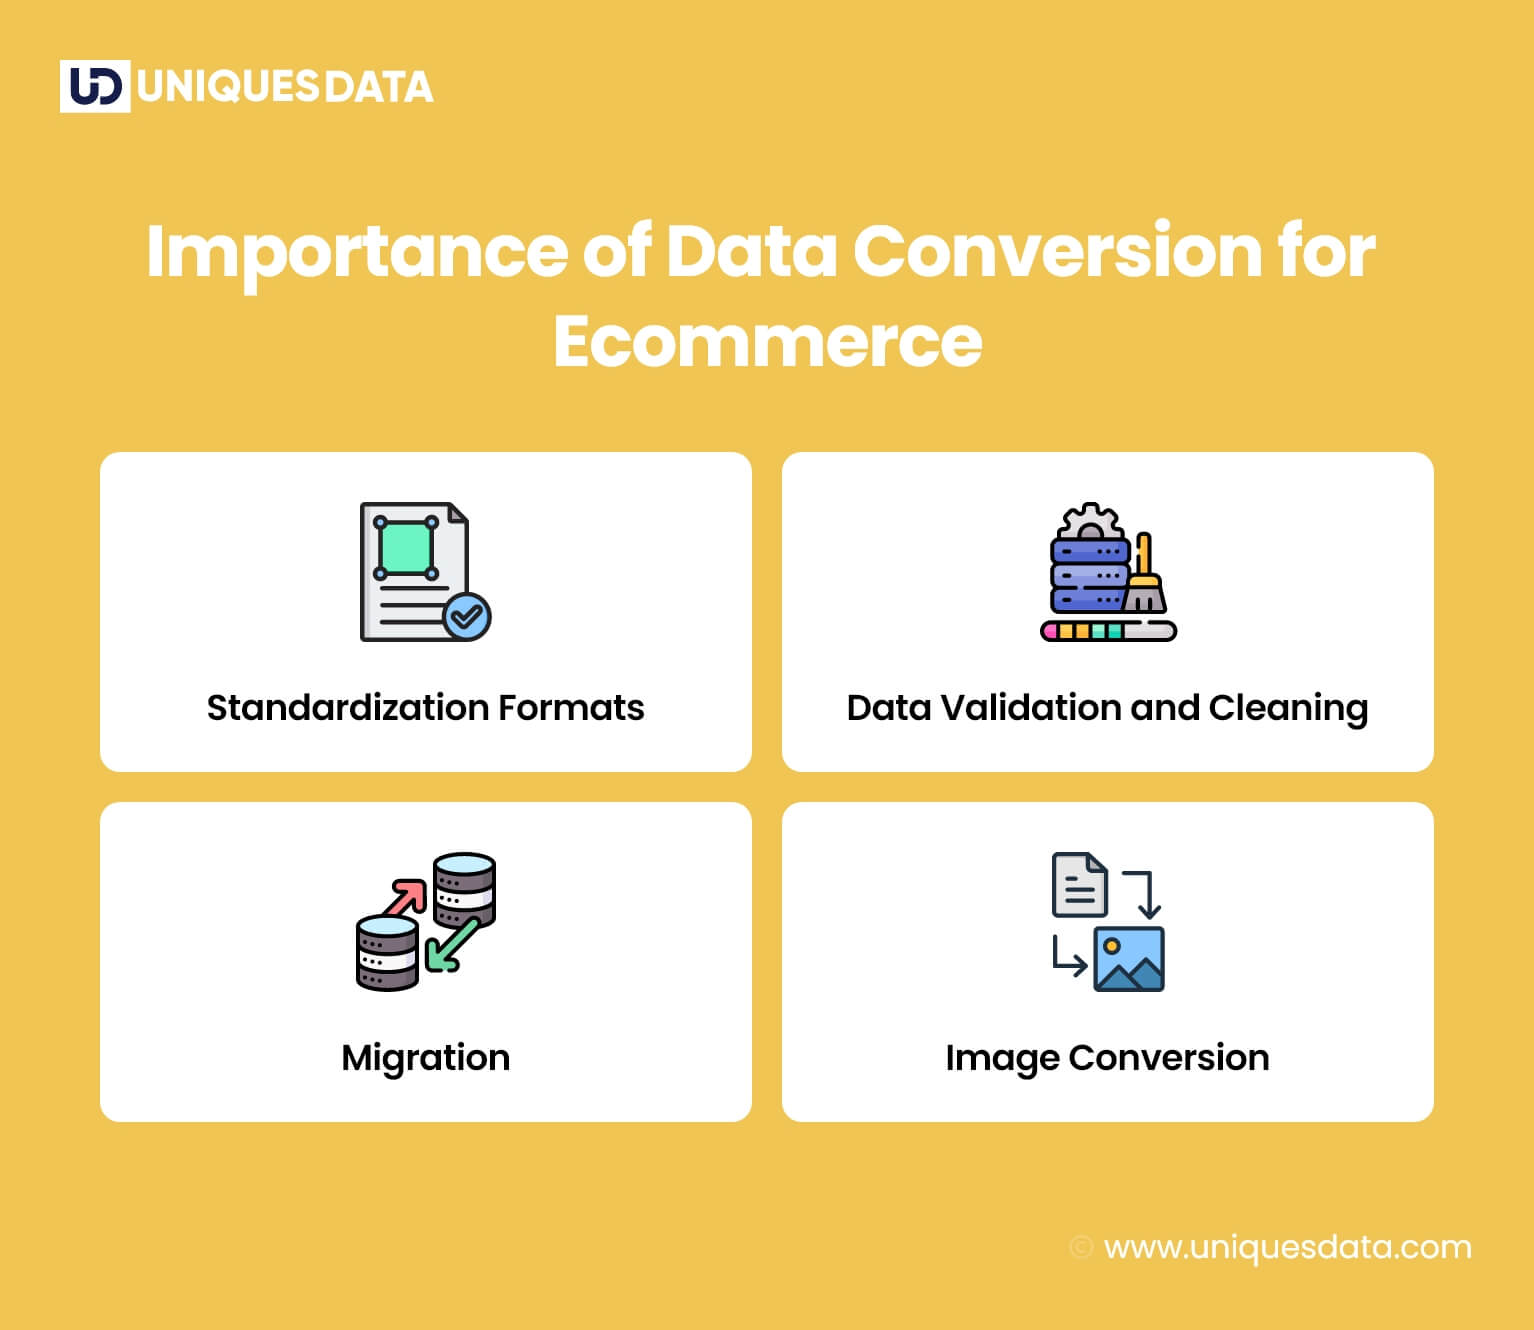 Importance of Data Conversion for Ecommerce